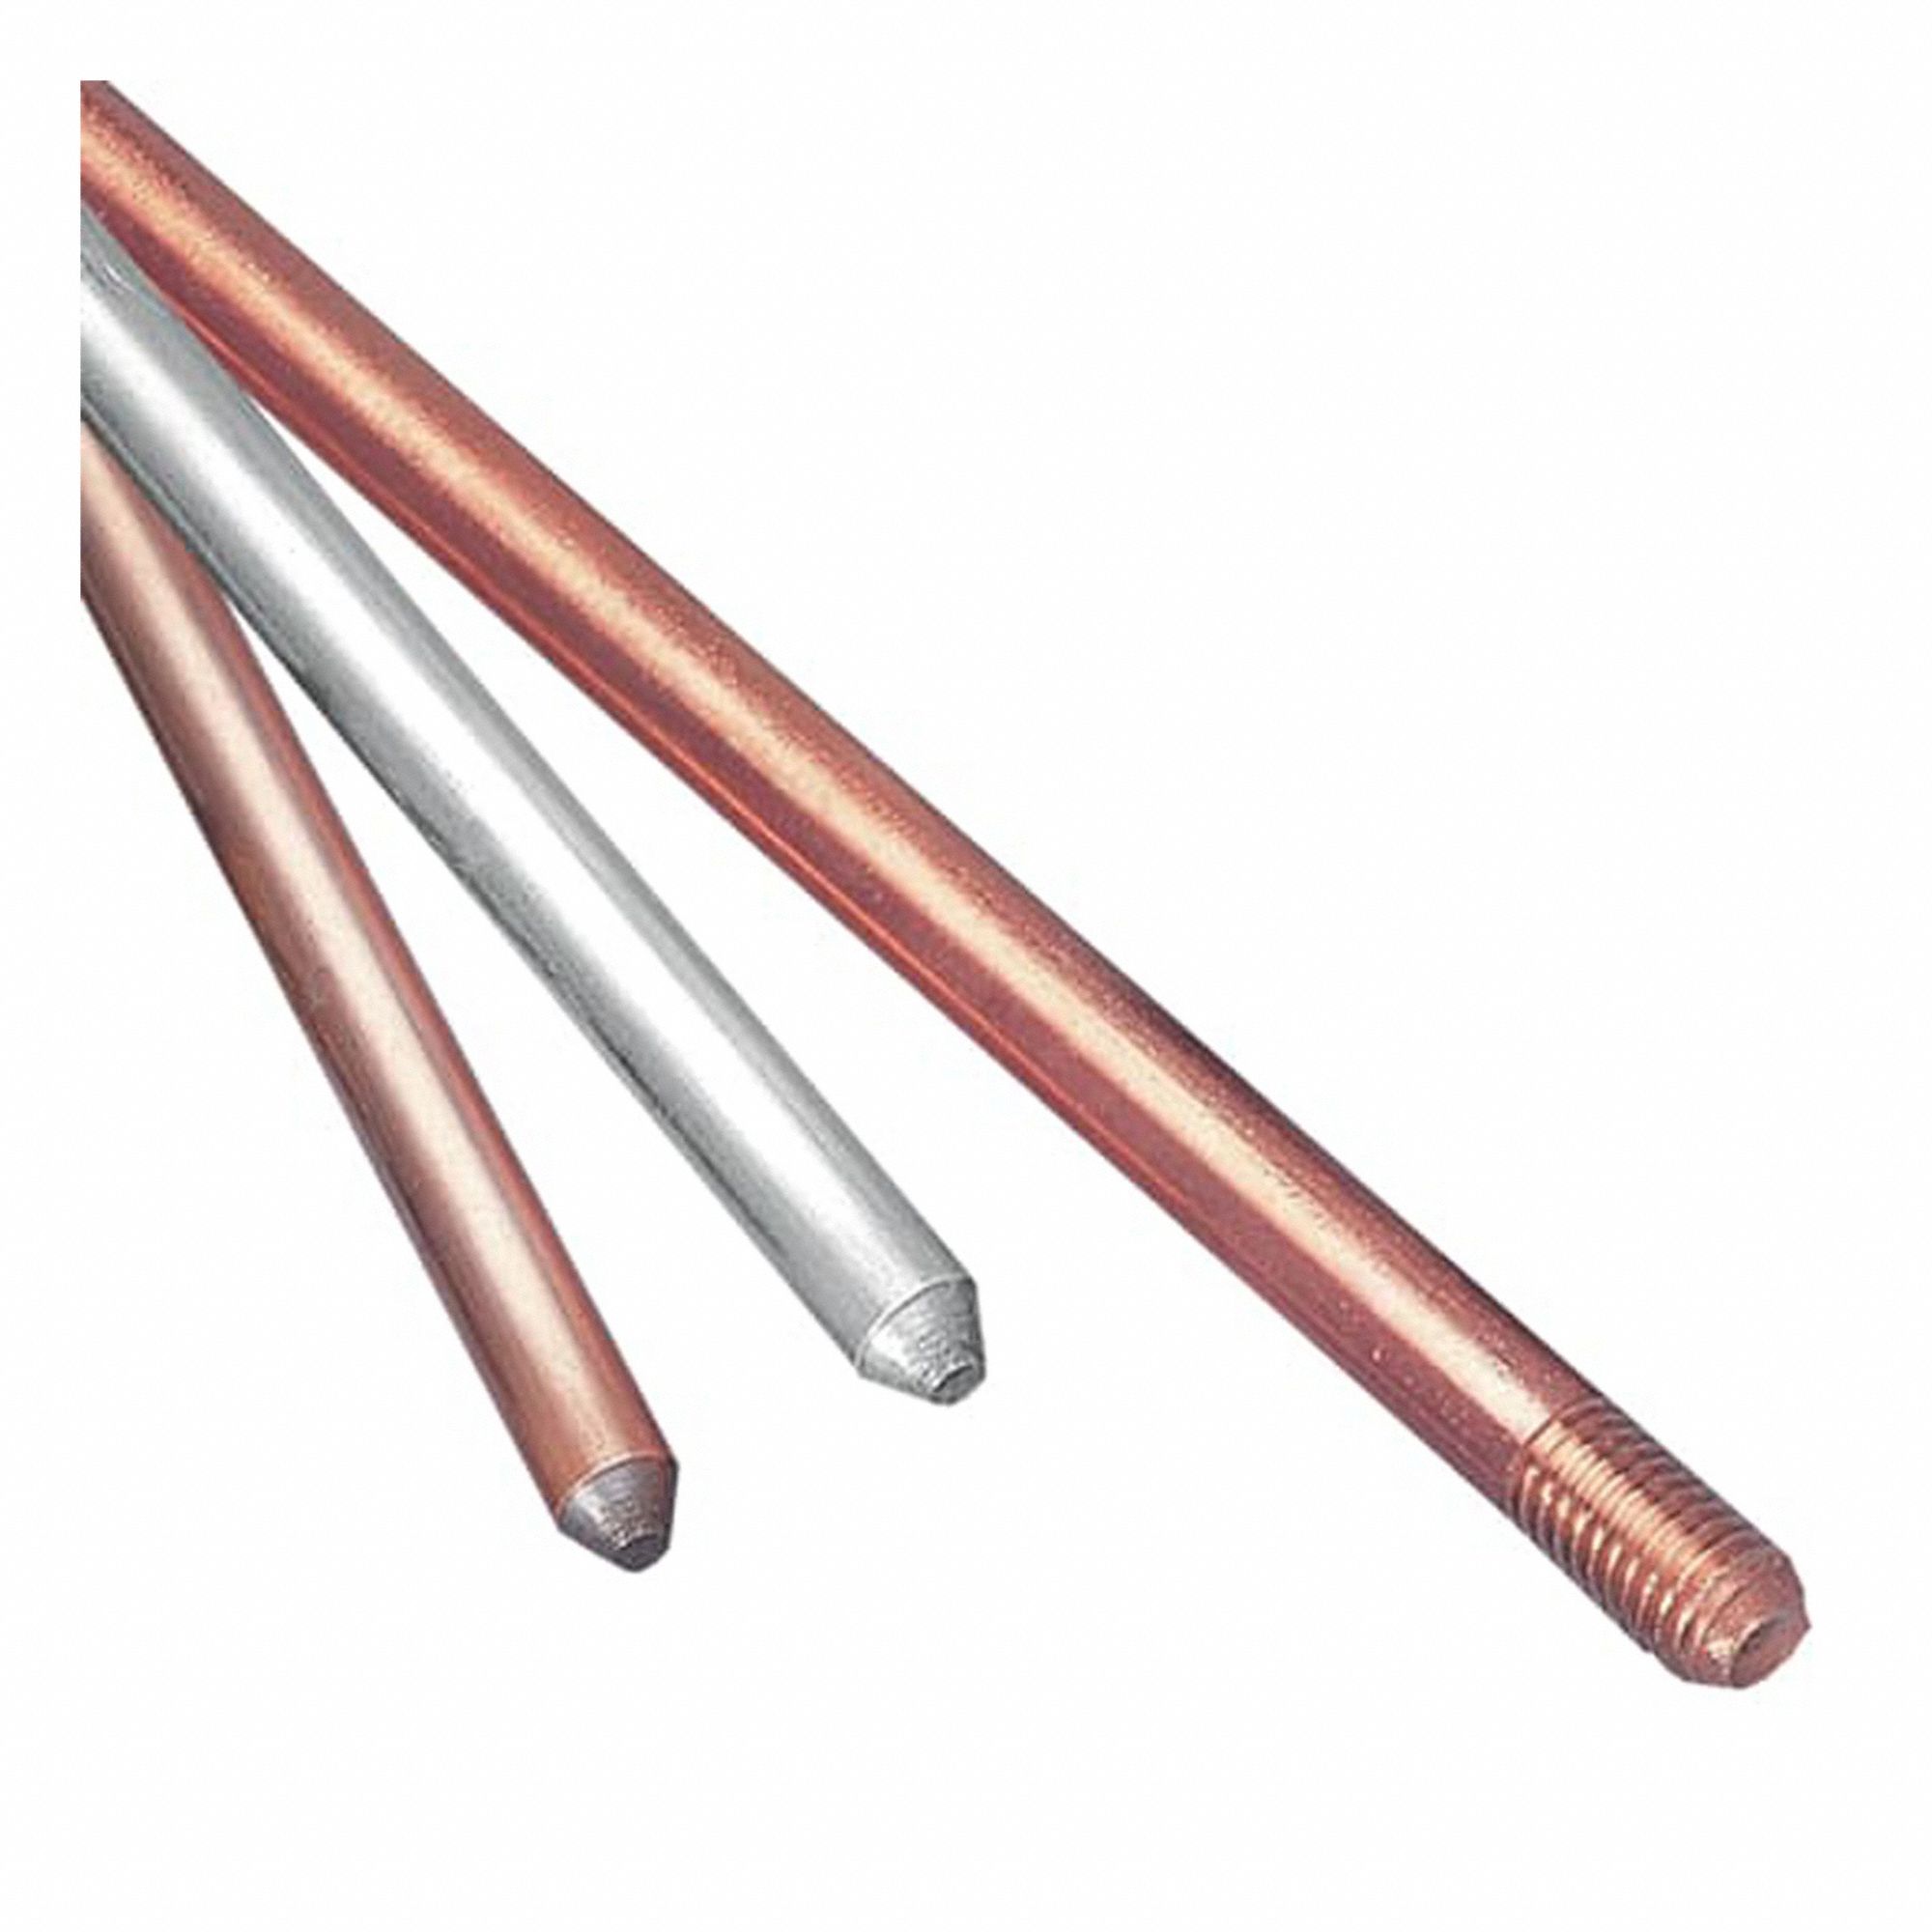 THOMAS & BETTS GROUND RODS, RUSTPROOF, CORROSION RESISTANT, 8 FT X 5/8 IN  DIA, GALVANIZED STEEL - Ground Rods - TBSGR6258